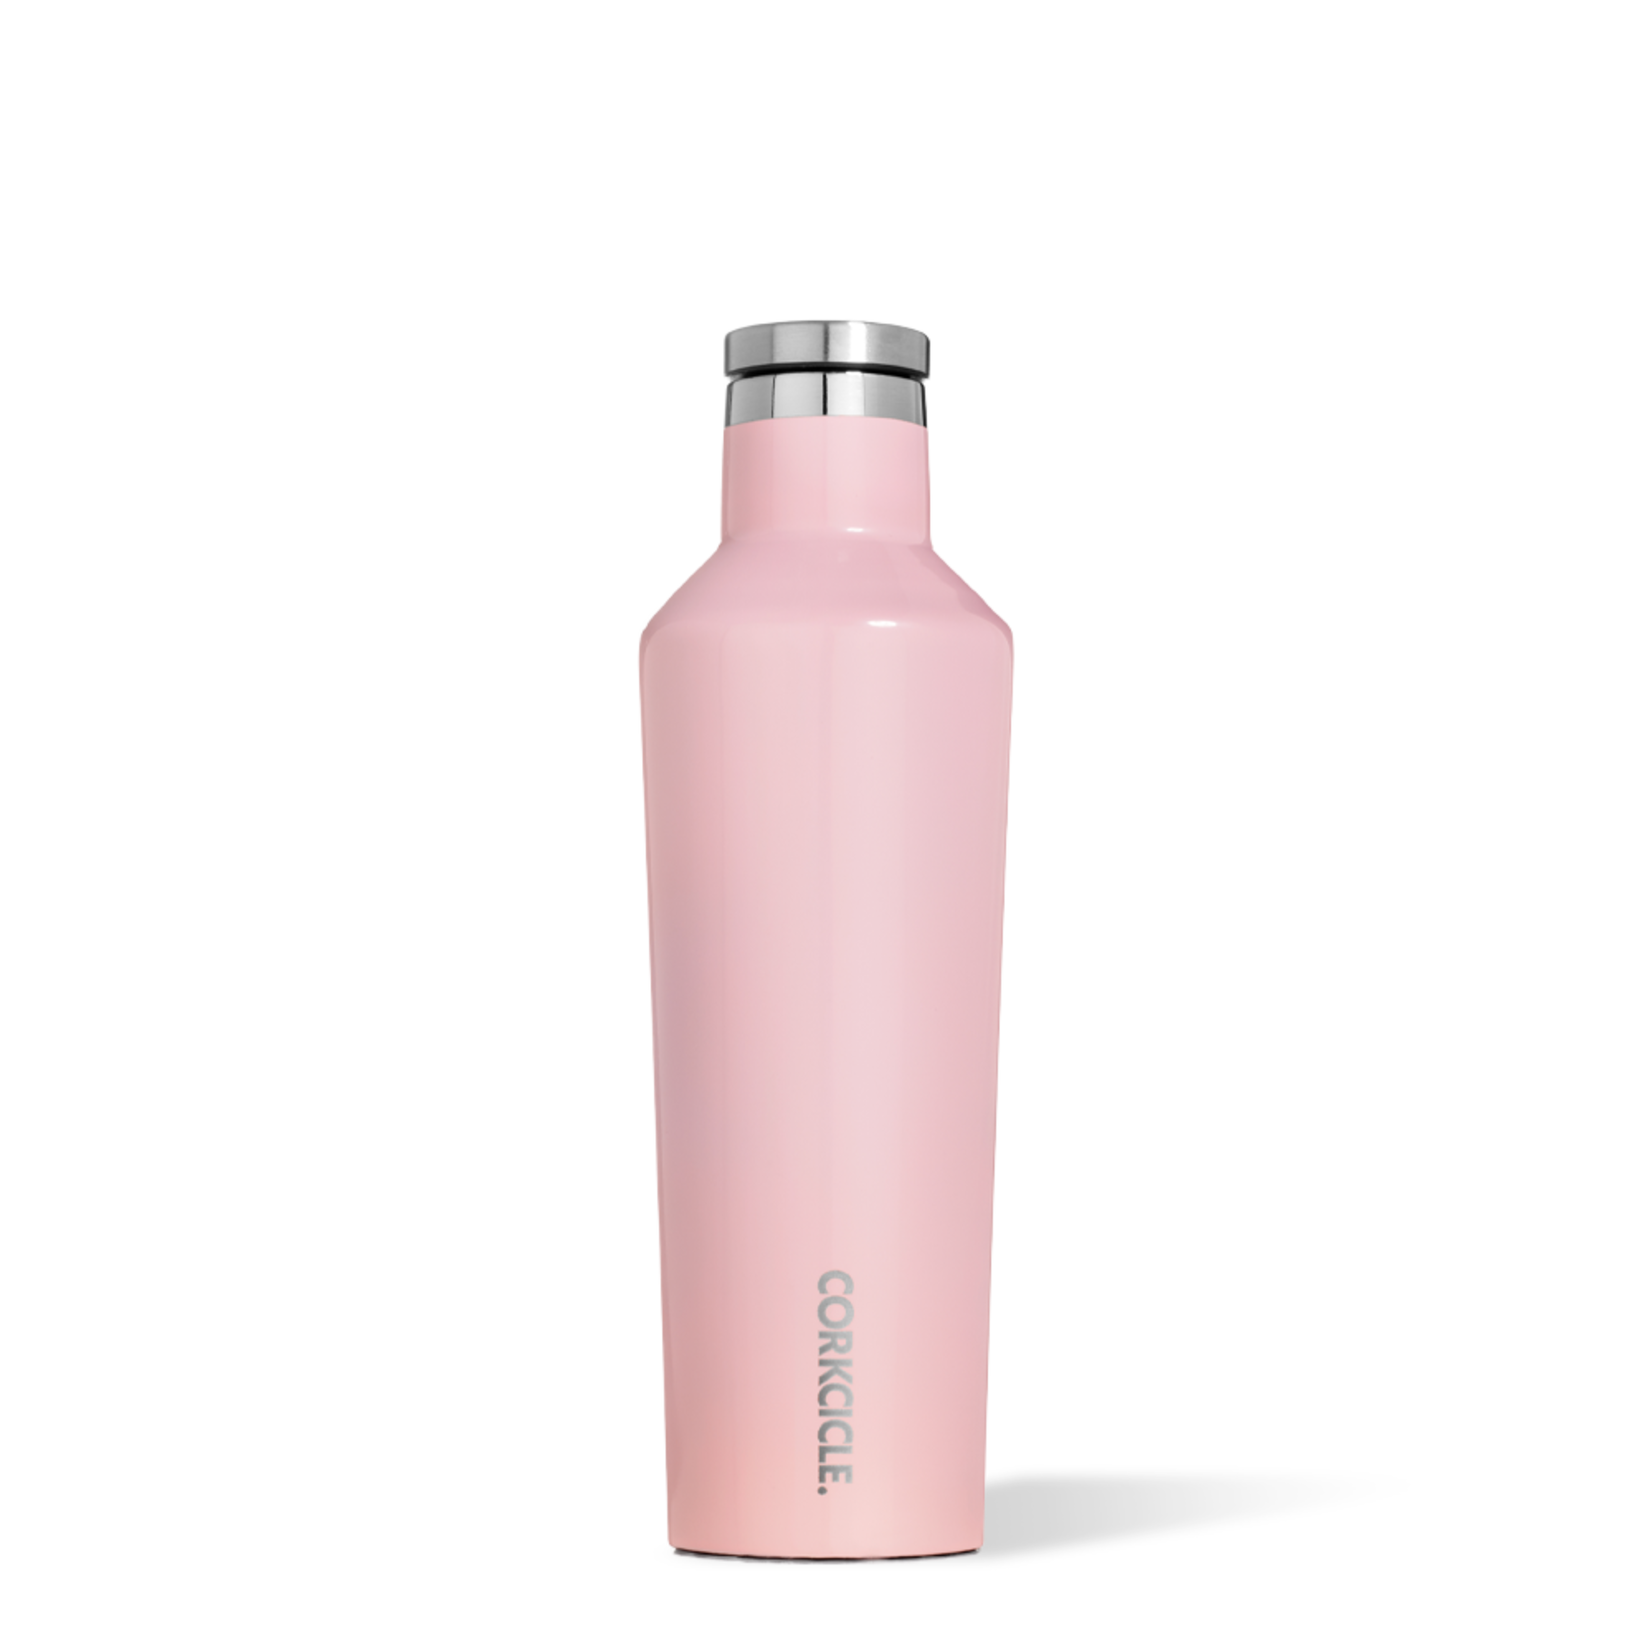 Corkcicle Corkcicle - 16oz Canteen - Pink